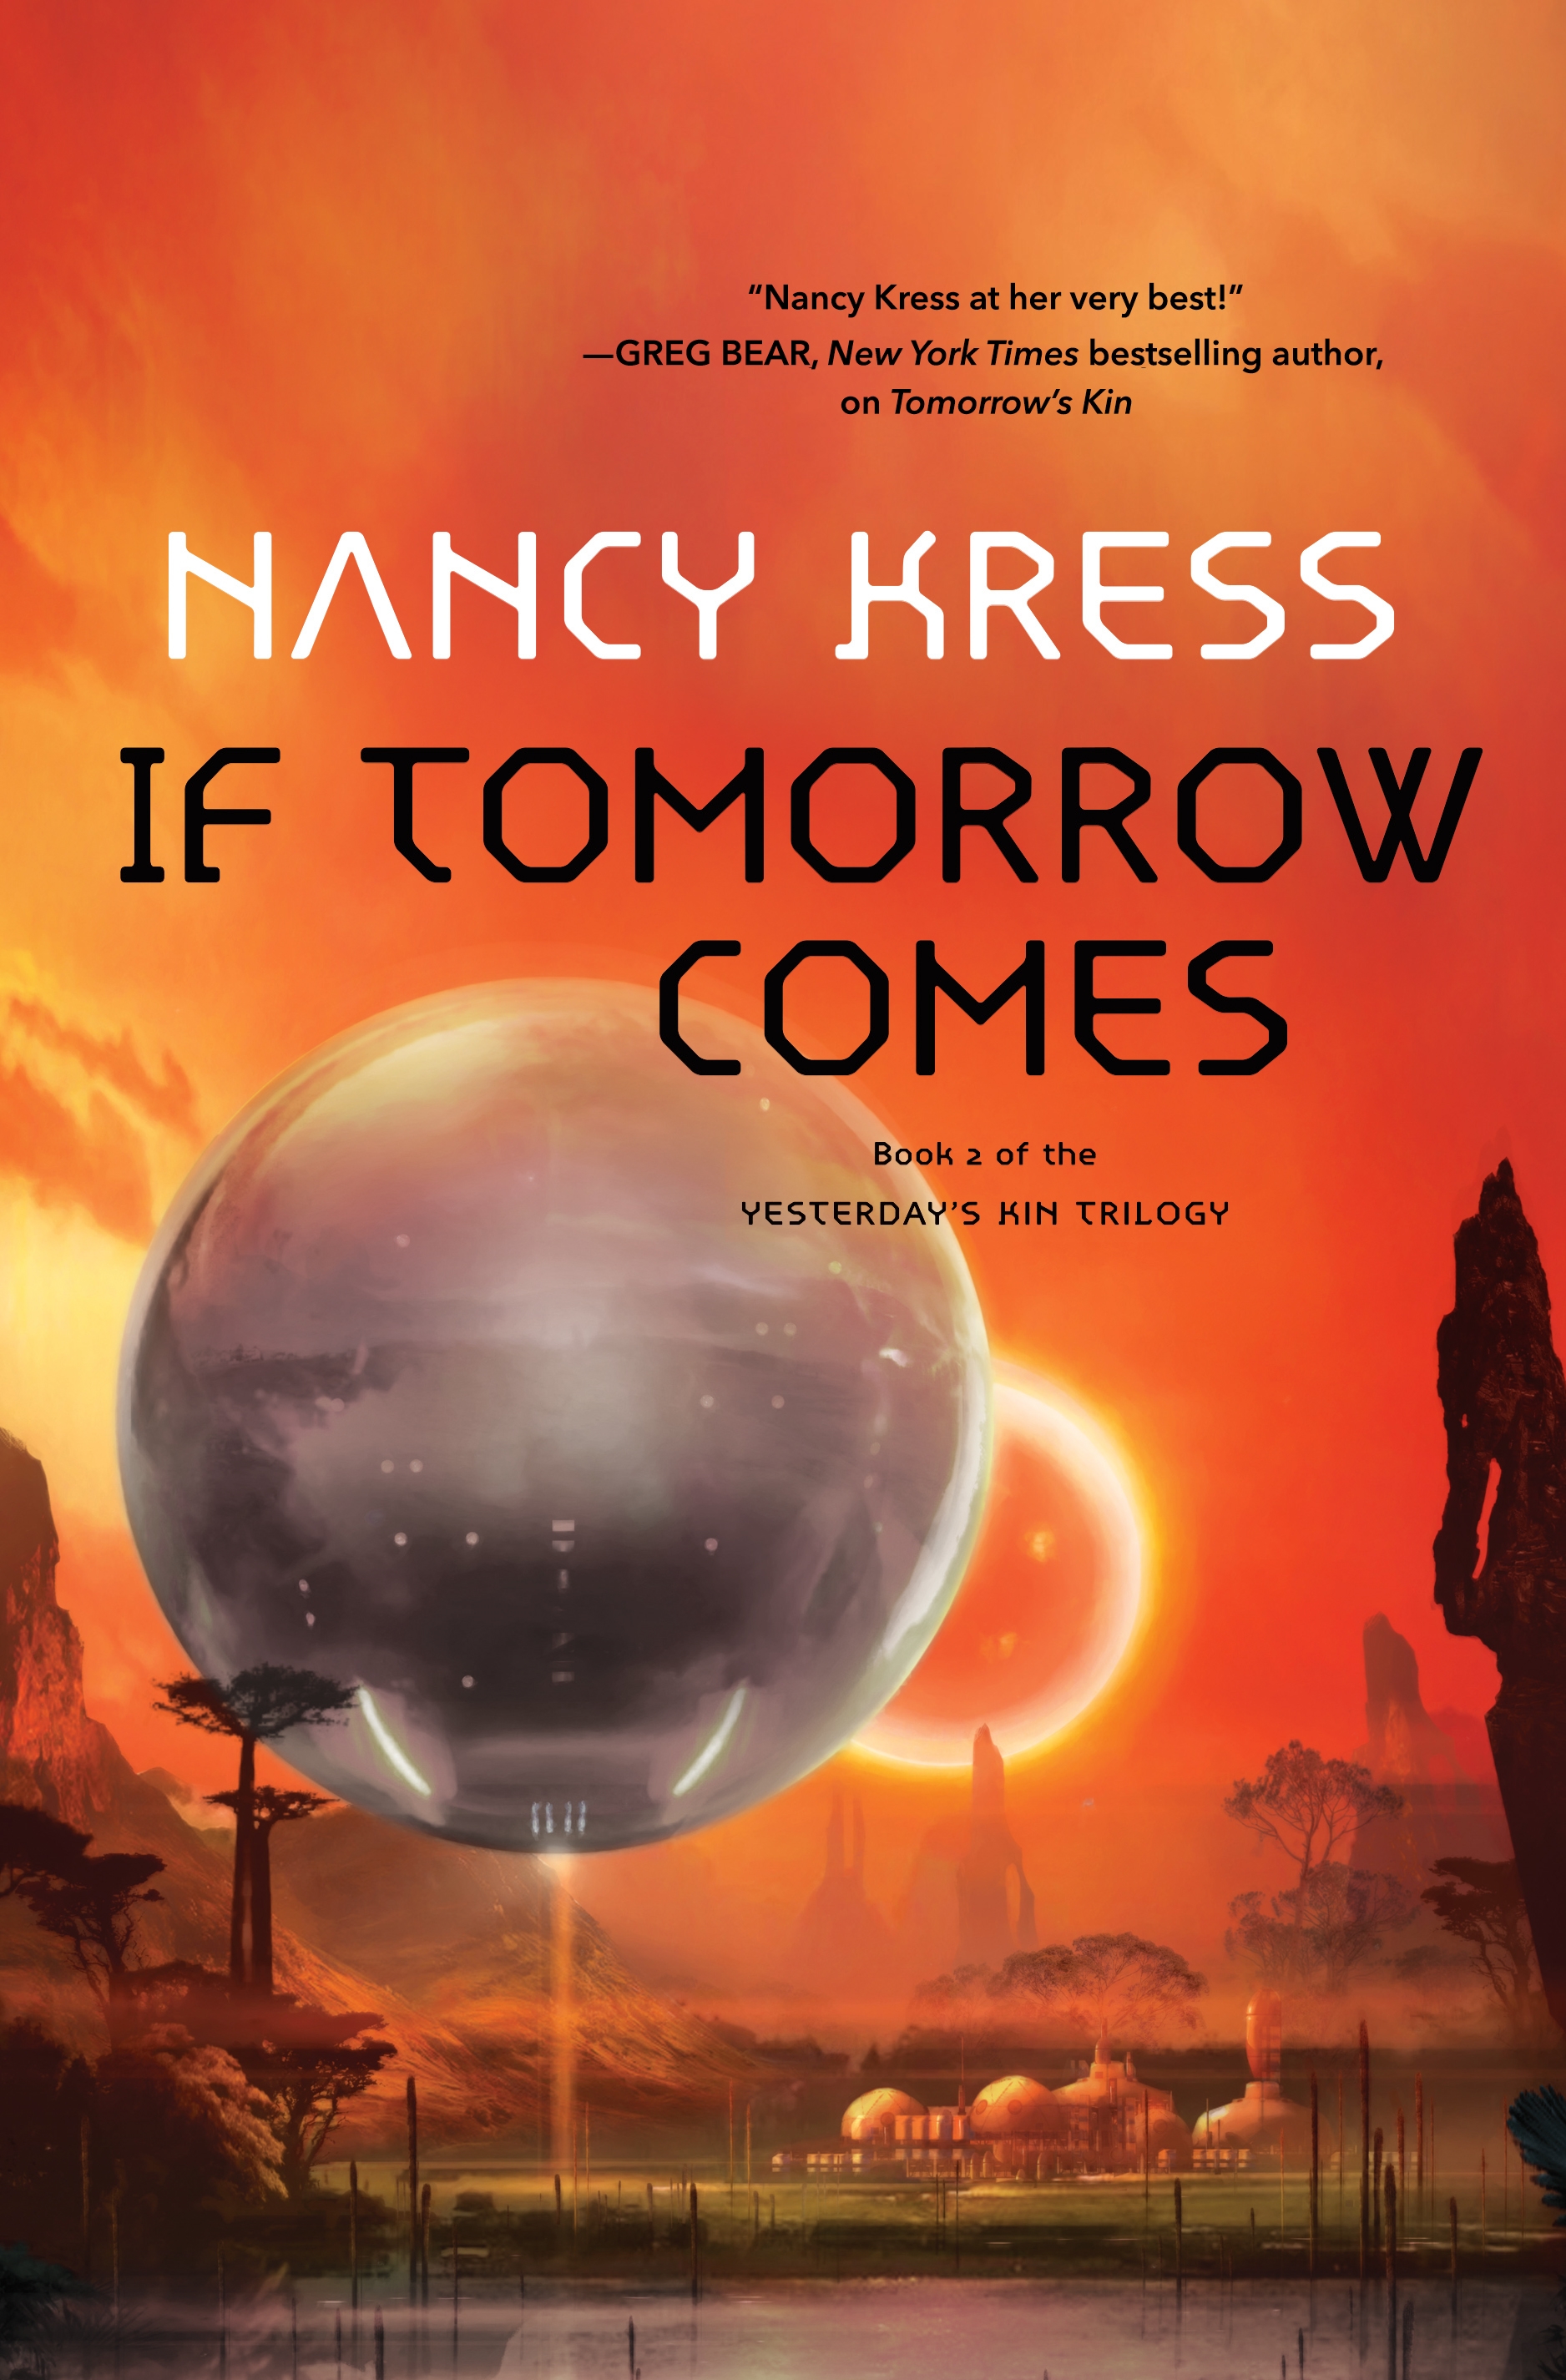 If Tomorrow Comes : Book 2 of the Yesterday's Kin Trilogy by Nancy Kress